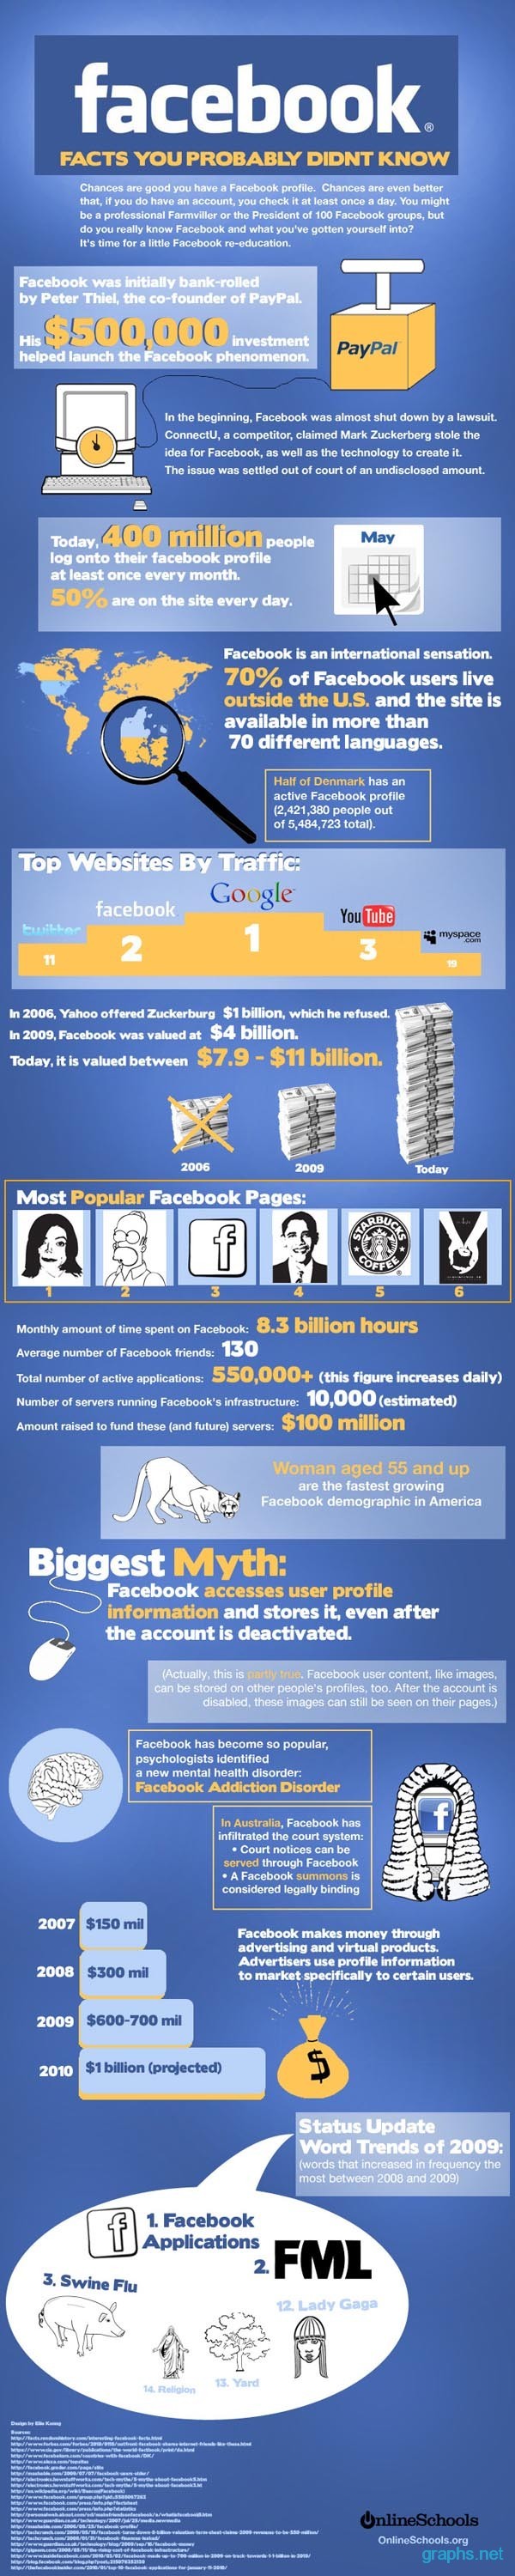 Facts About Facebook